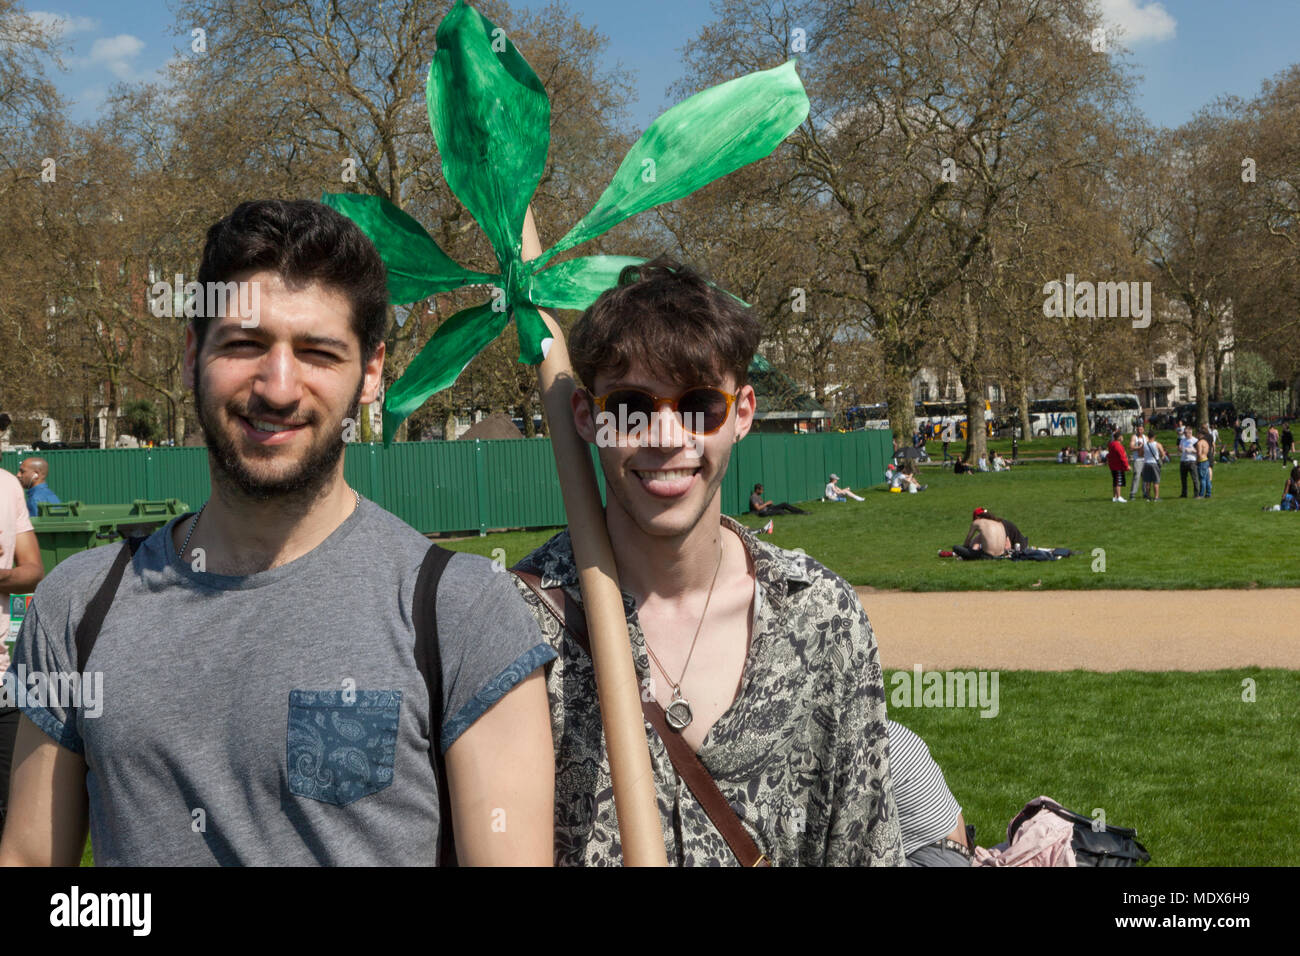 Hyde Park, London UK 20 April, 2018. Hundreds of pot smokers turn out for the annual 420 Day Rally in Hyde Park, London to party and smoke cannabis under the watchful eye of the local police. The term “420” has become universally known as the code word for smoking pot, attributed to a group of teens in San Rafael, California who coined the phrase in 1971 as slang for toking up at 4:20pm, it has now become a world-wide phenomenon. Credit: Steve Parkins/Alamy Live News Stock Photo